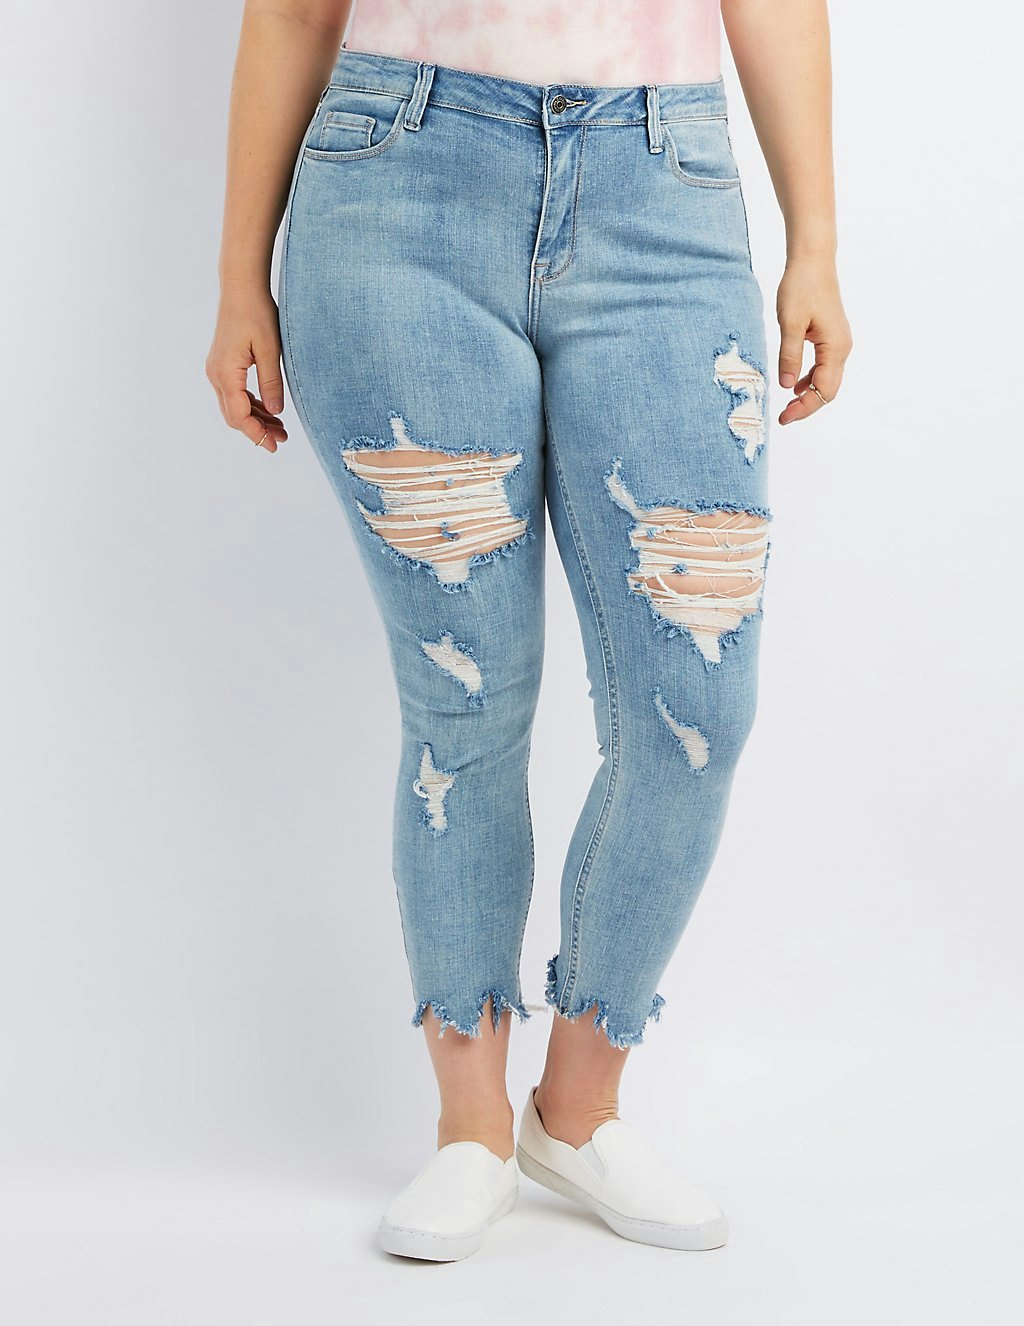 cello jeans charlotte russe